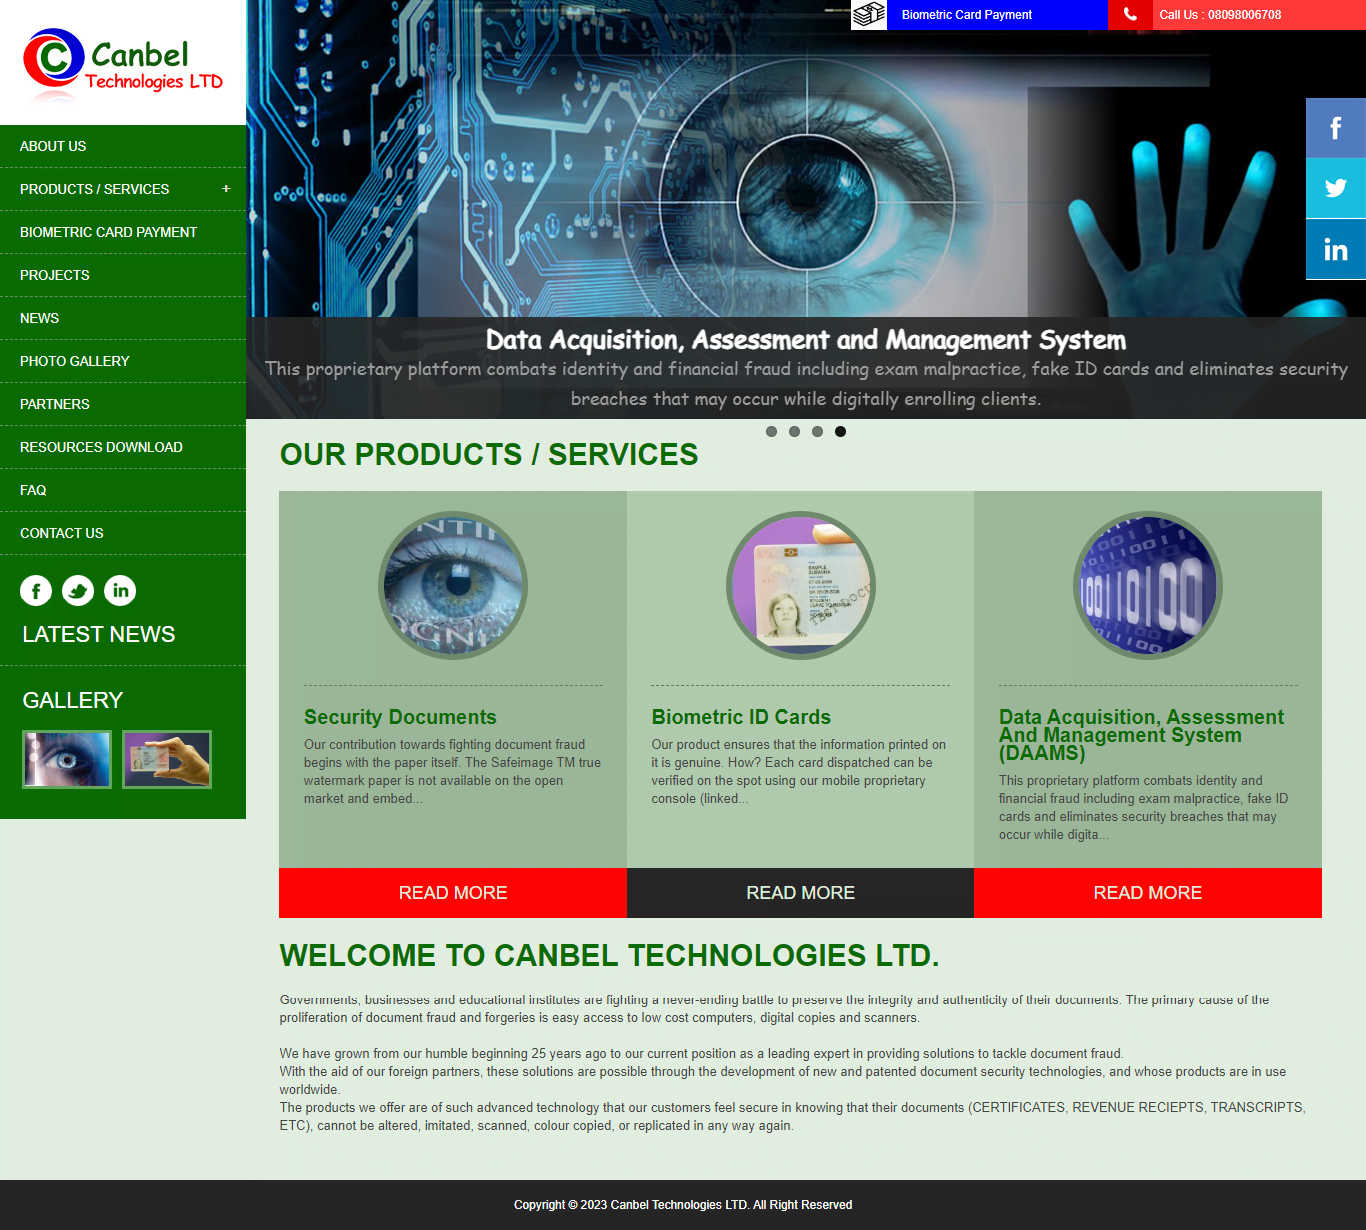 Canbel Technologies